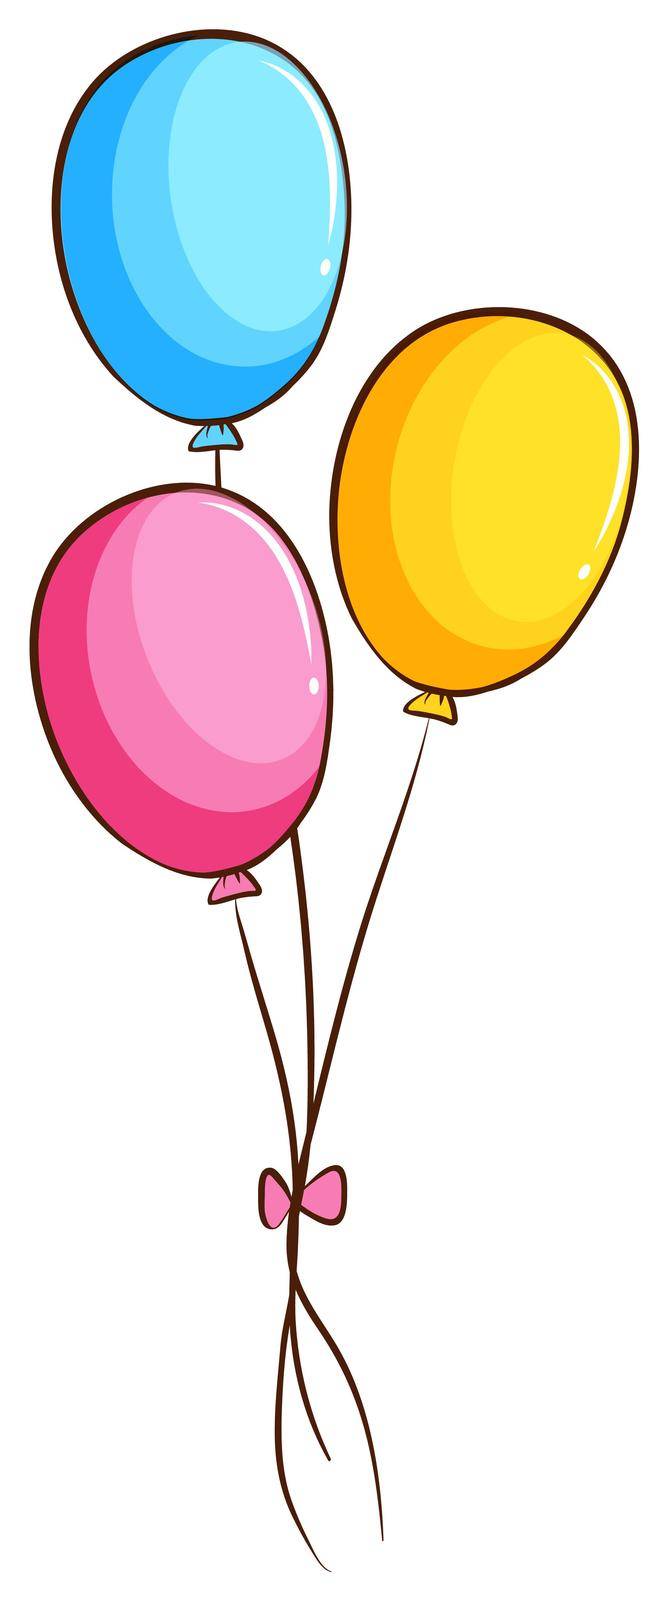 Illustration of a simple coloured drawing of balloons on a white background